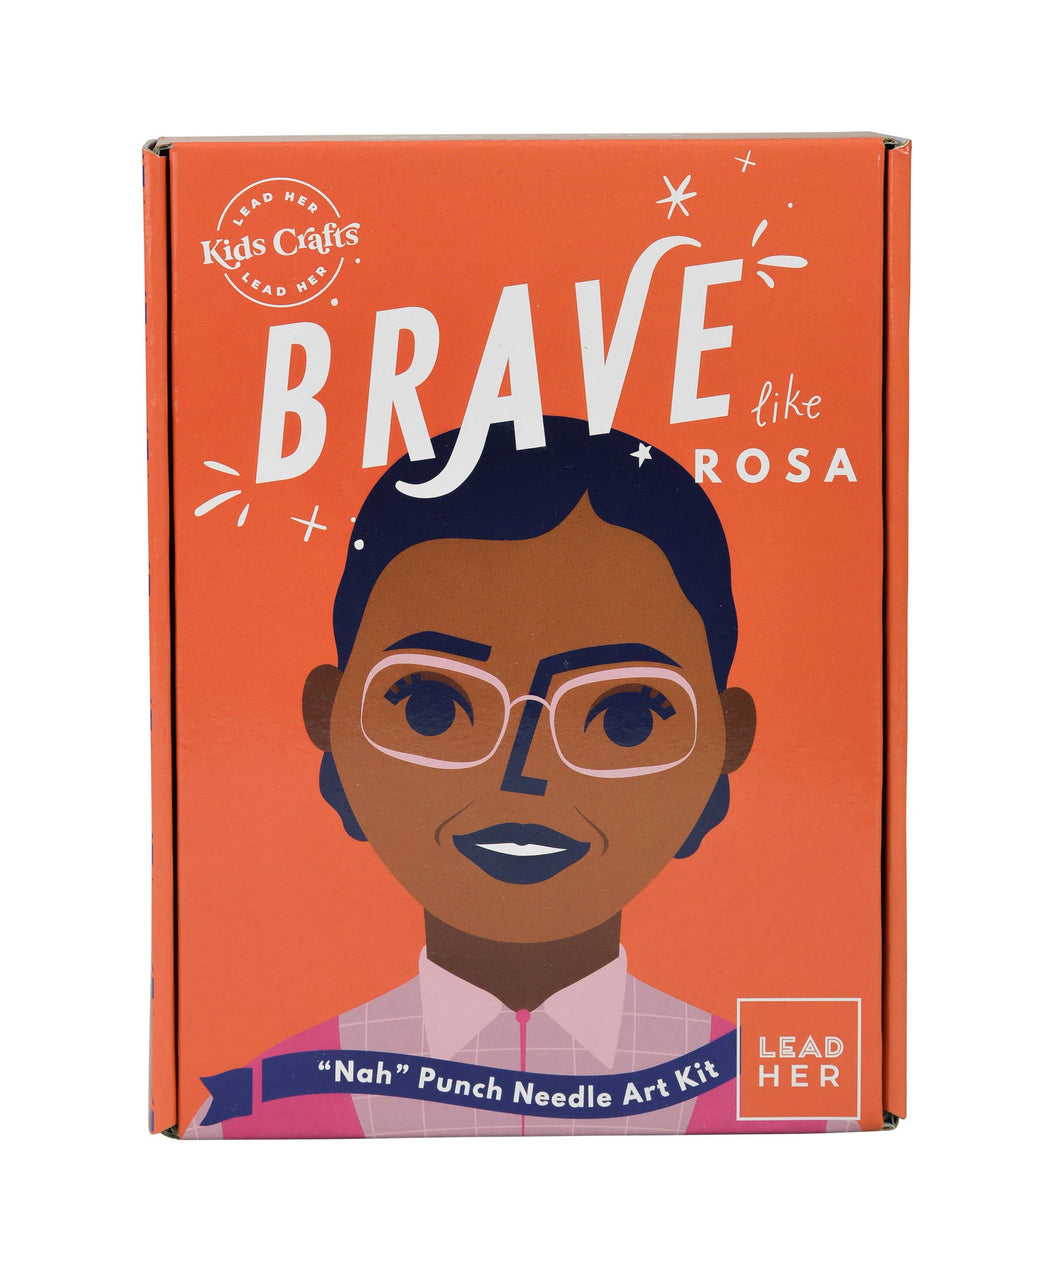 Front view of the “BRAVE like Rosa” punch needle craft kit packaging.